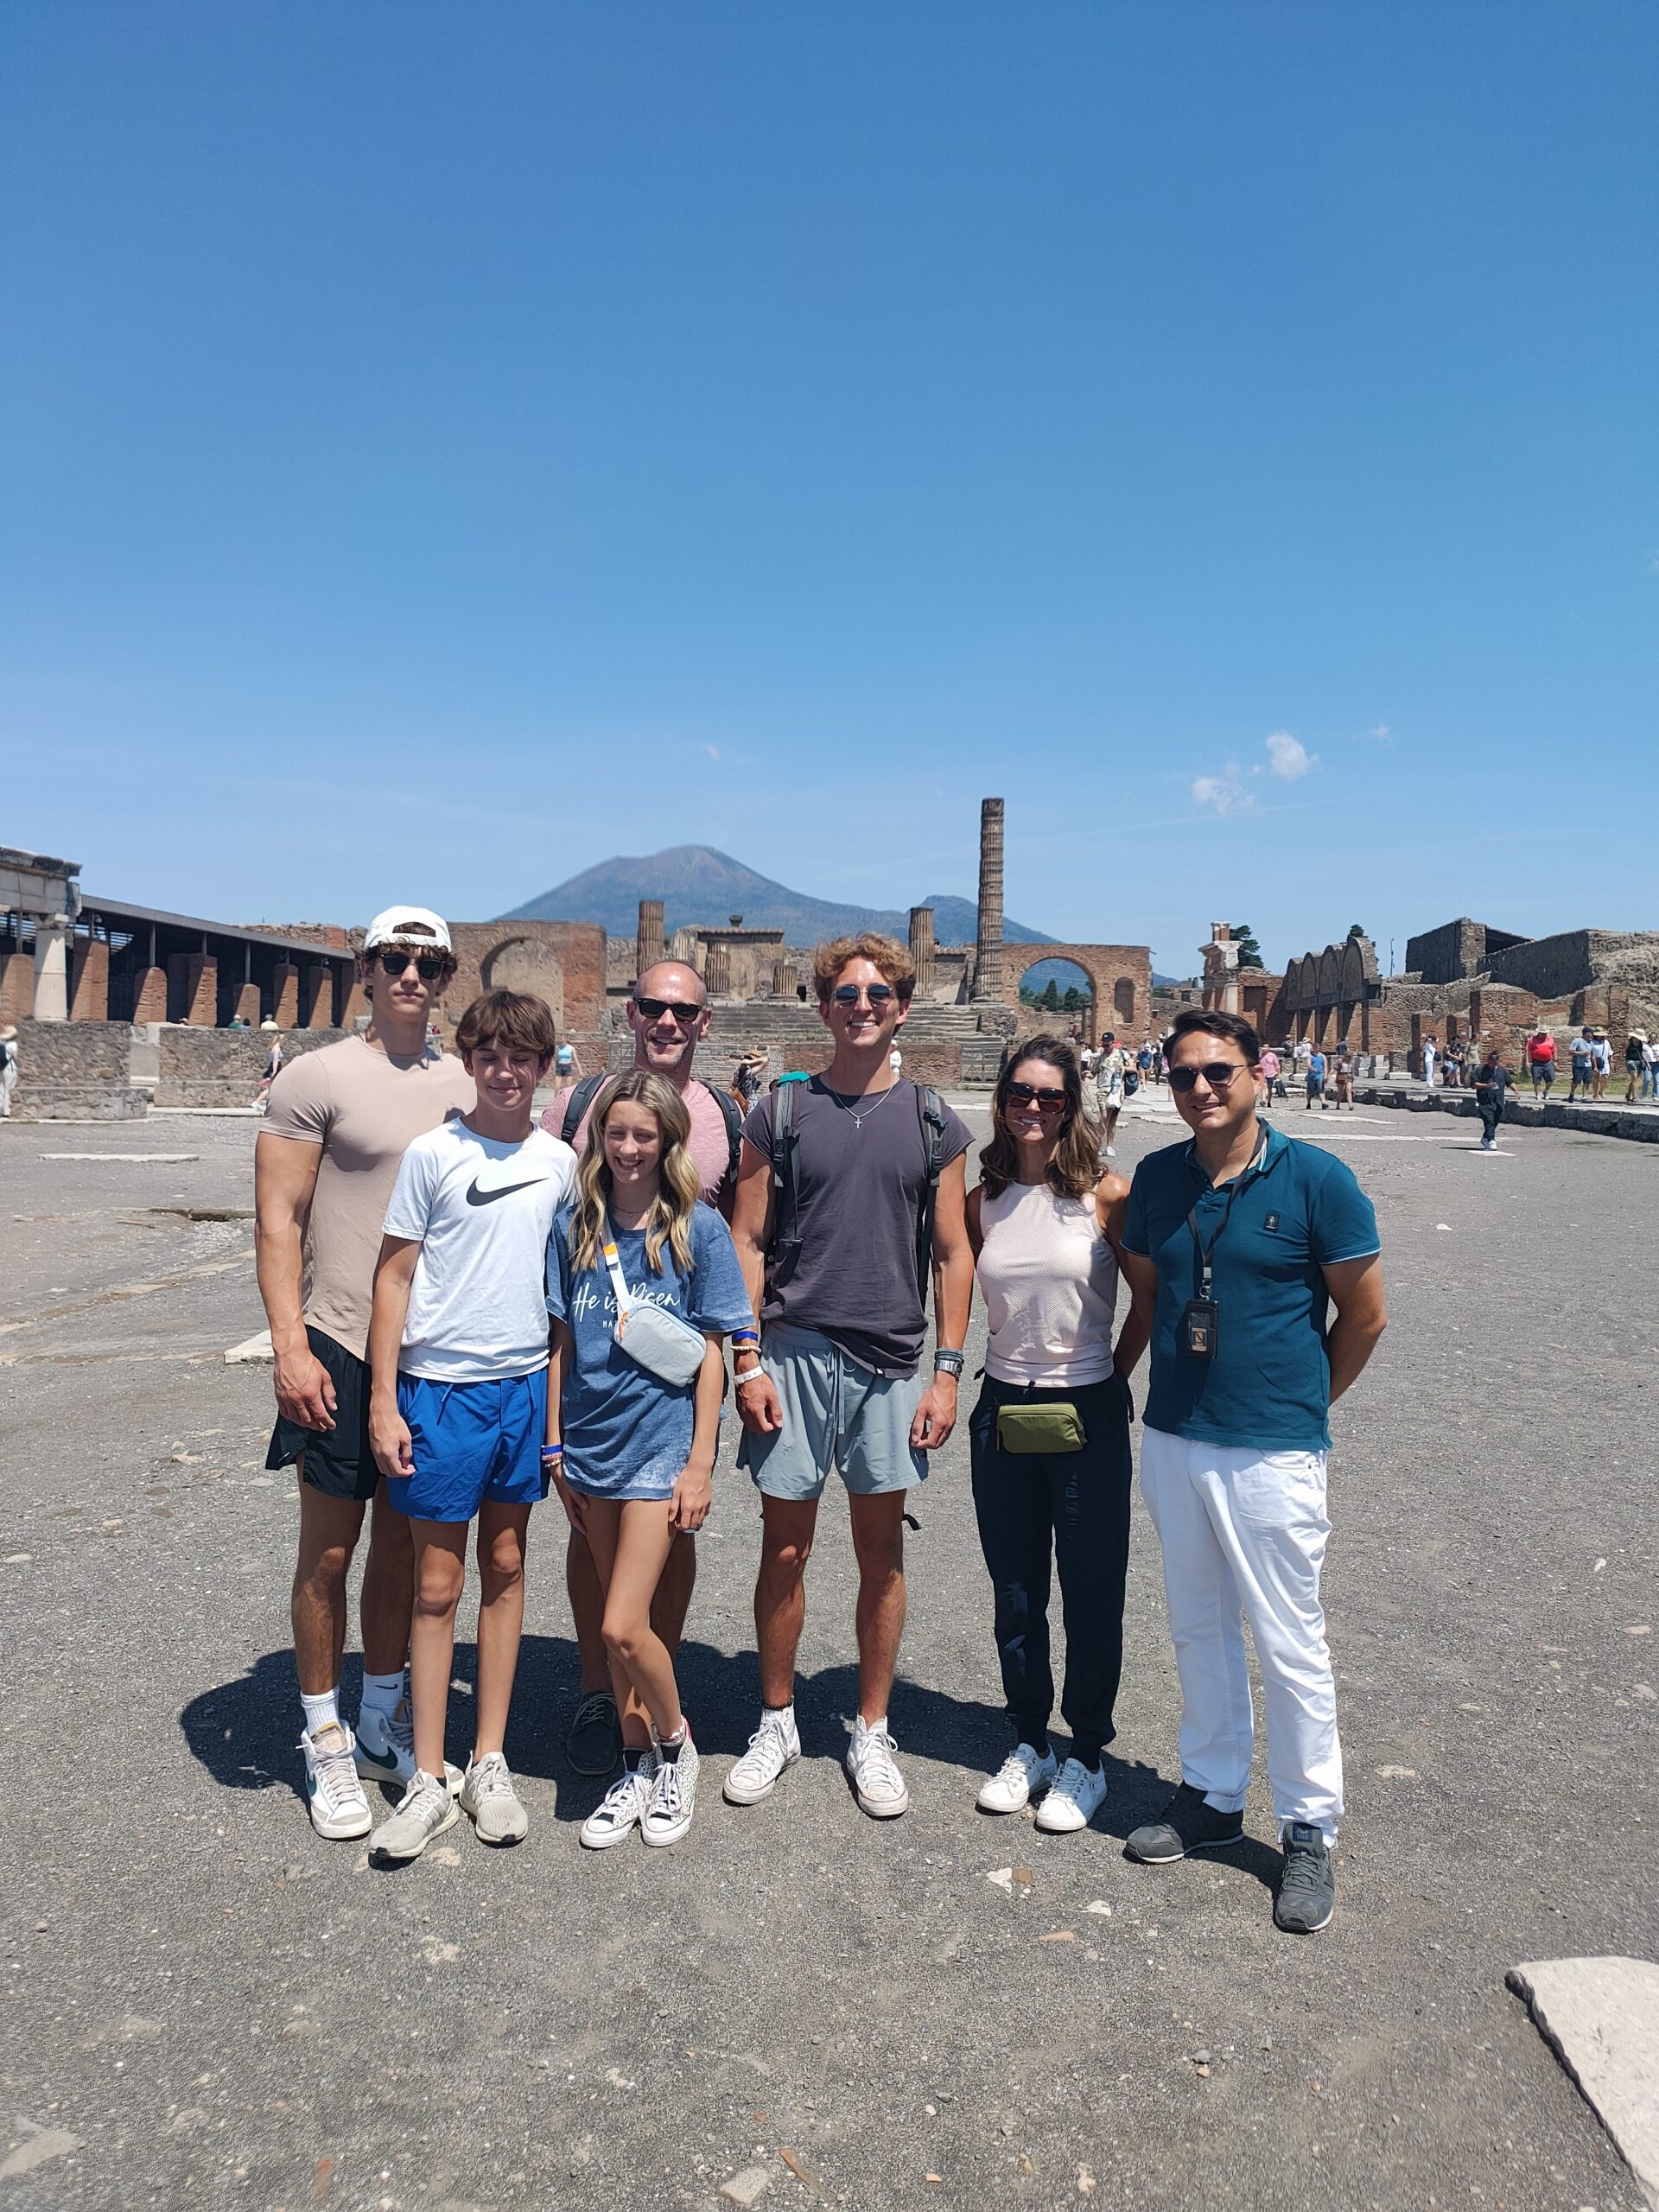 guided tours of pompeii and herculaneum